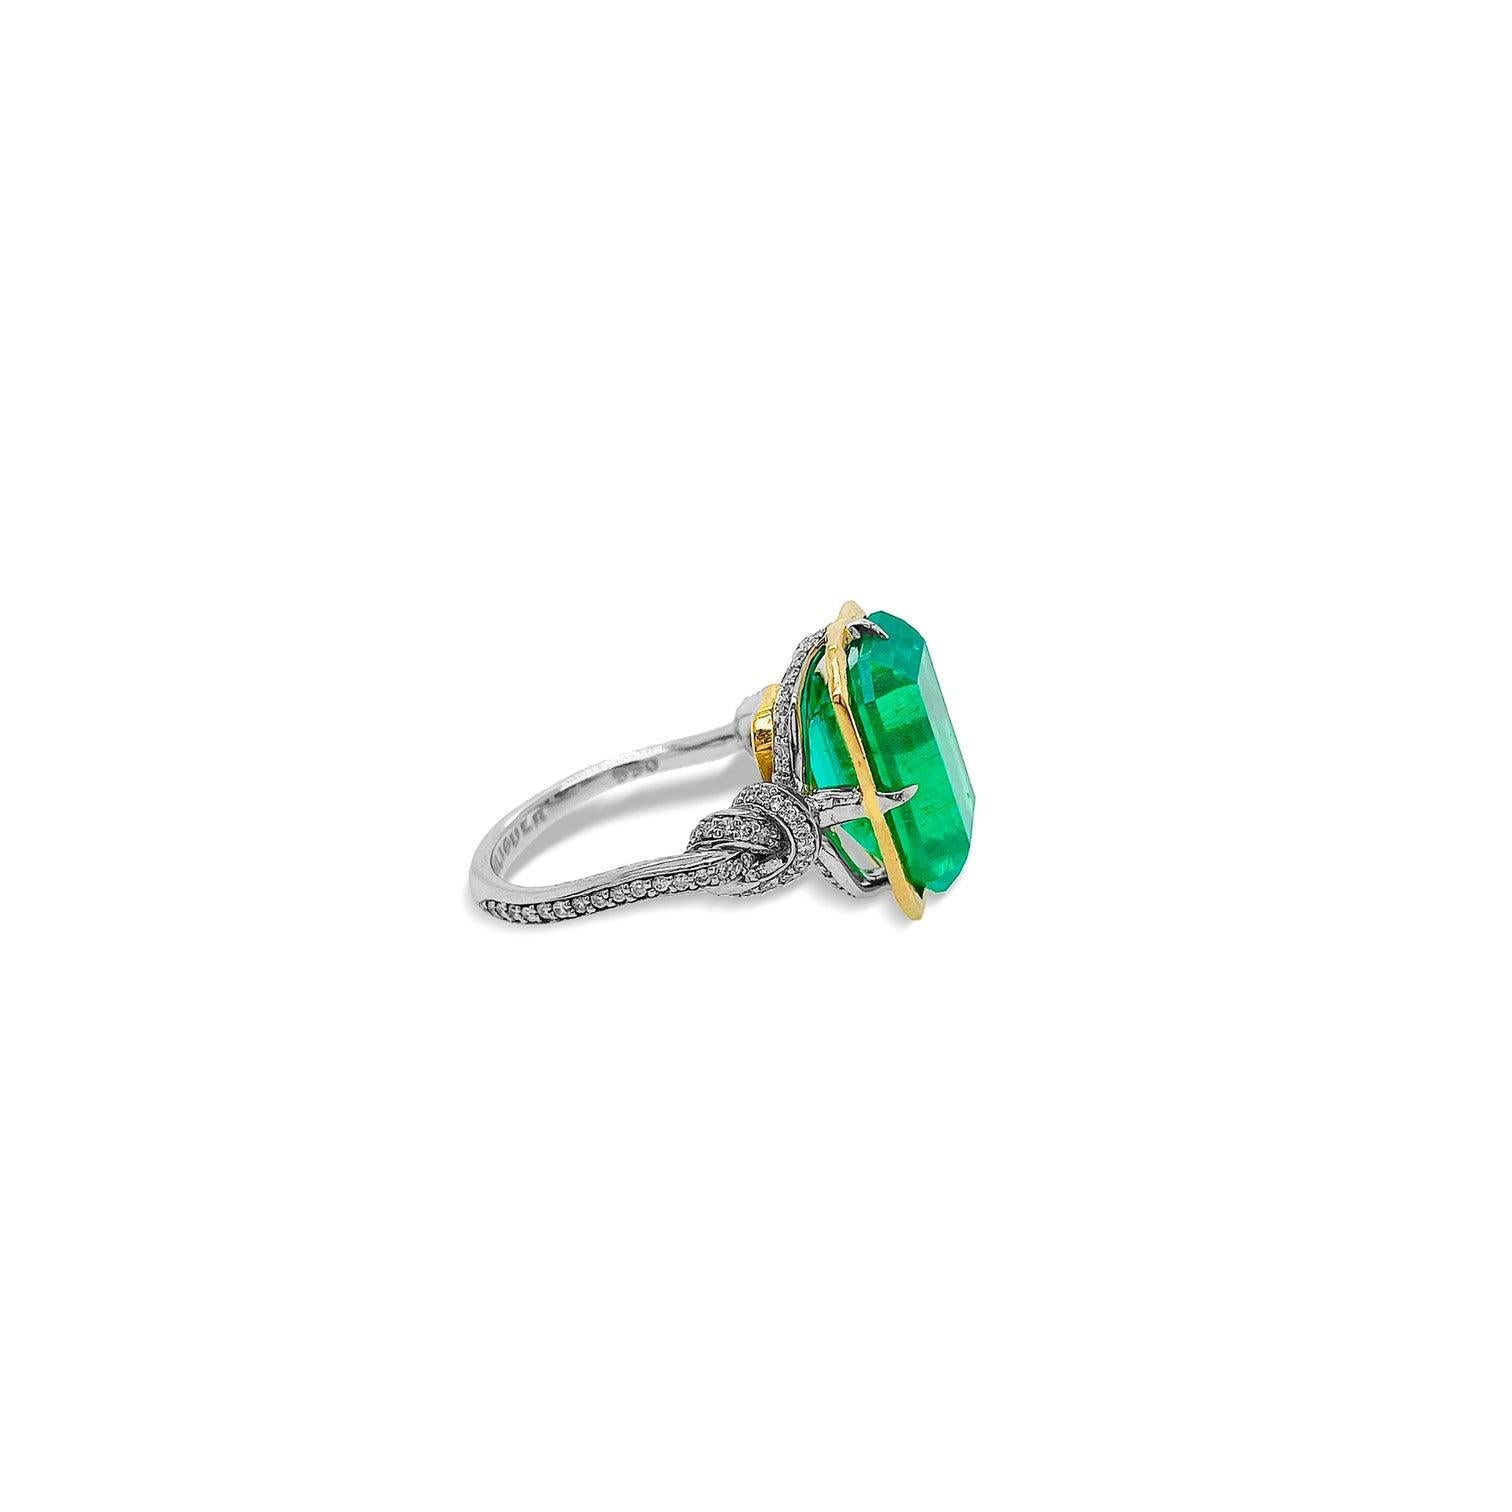 Emerald Cut 5.79ct Zambian Emerald in Forget Me Knot Style Ring